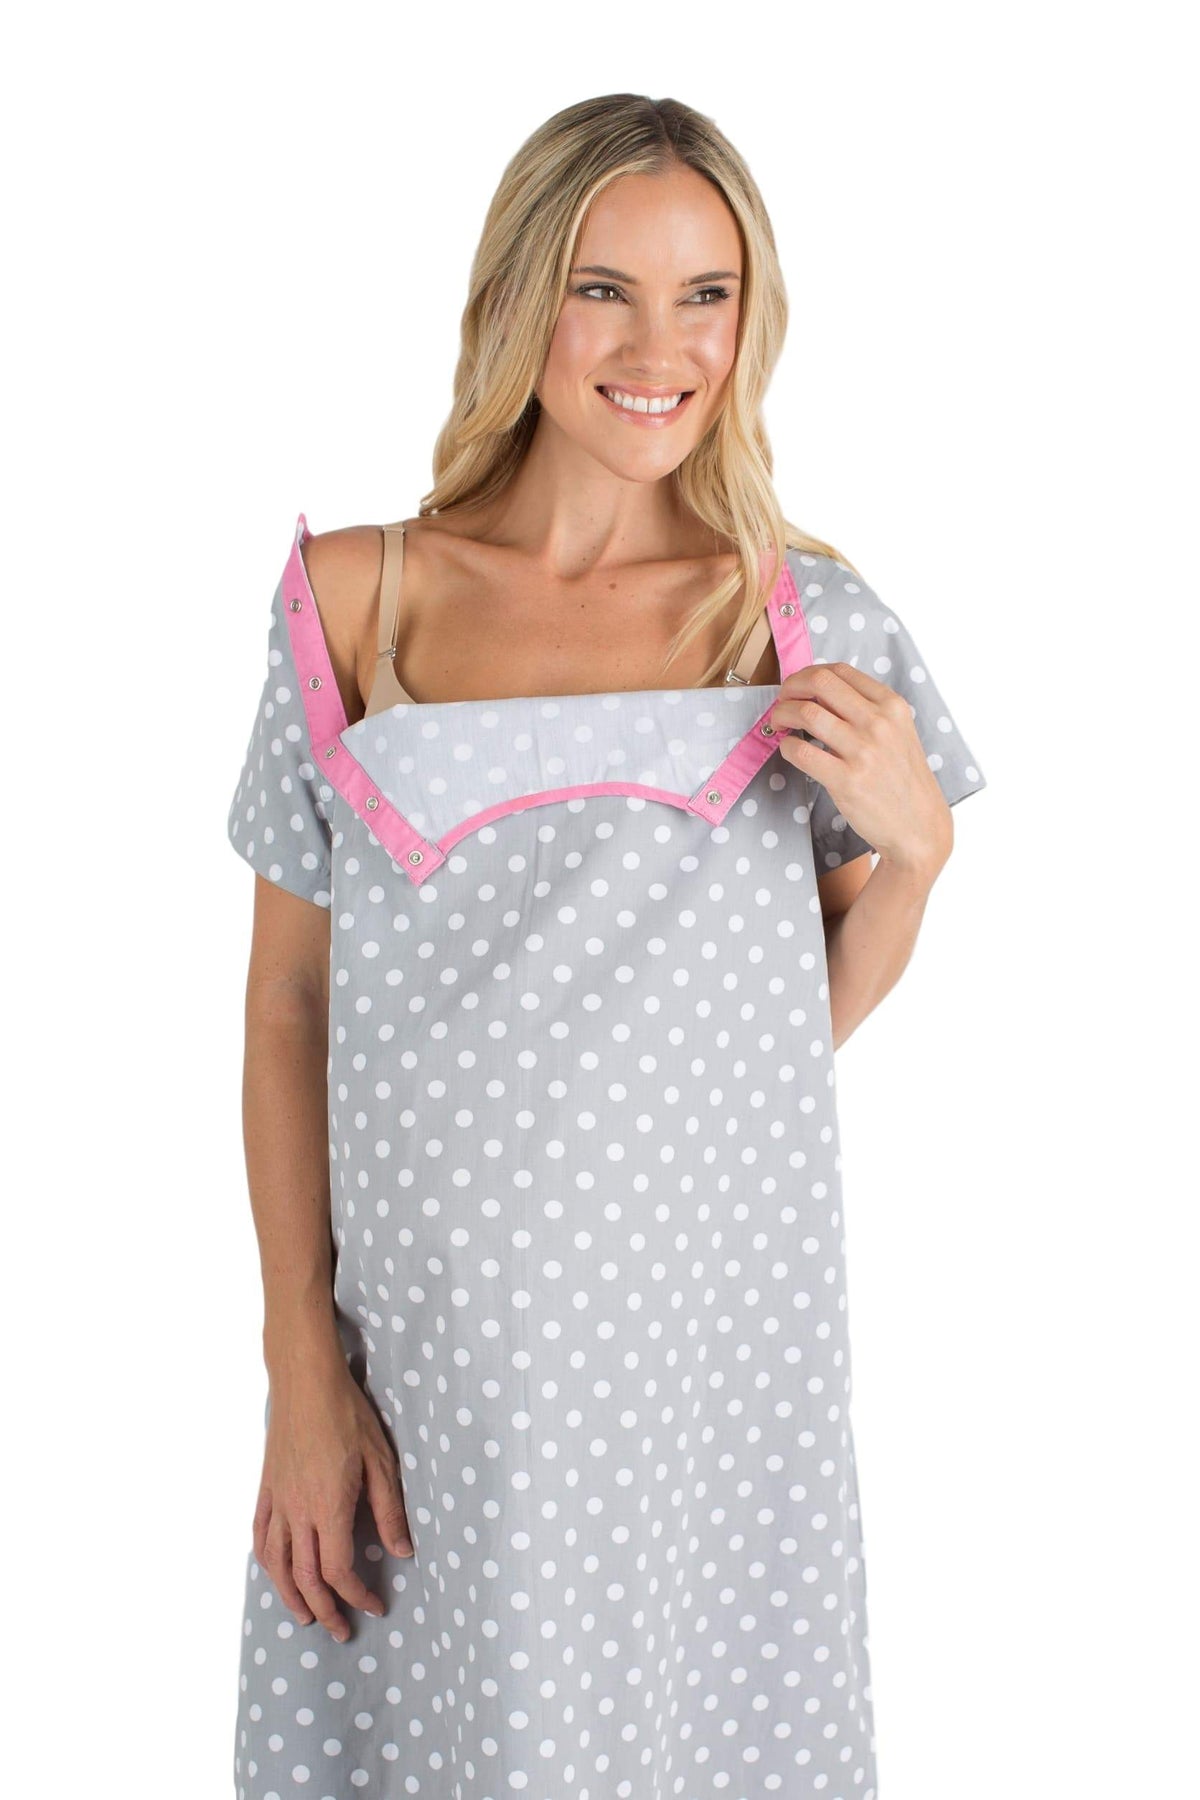 Lisa Grey Dotted Gownies: Designer Maternity Delivery Labor Hospital ...